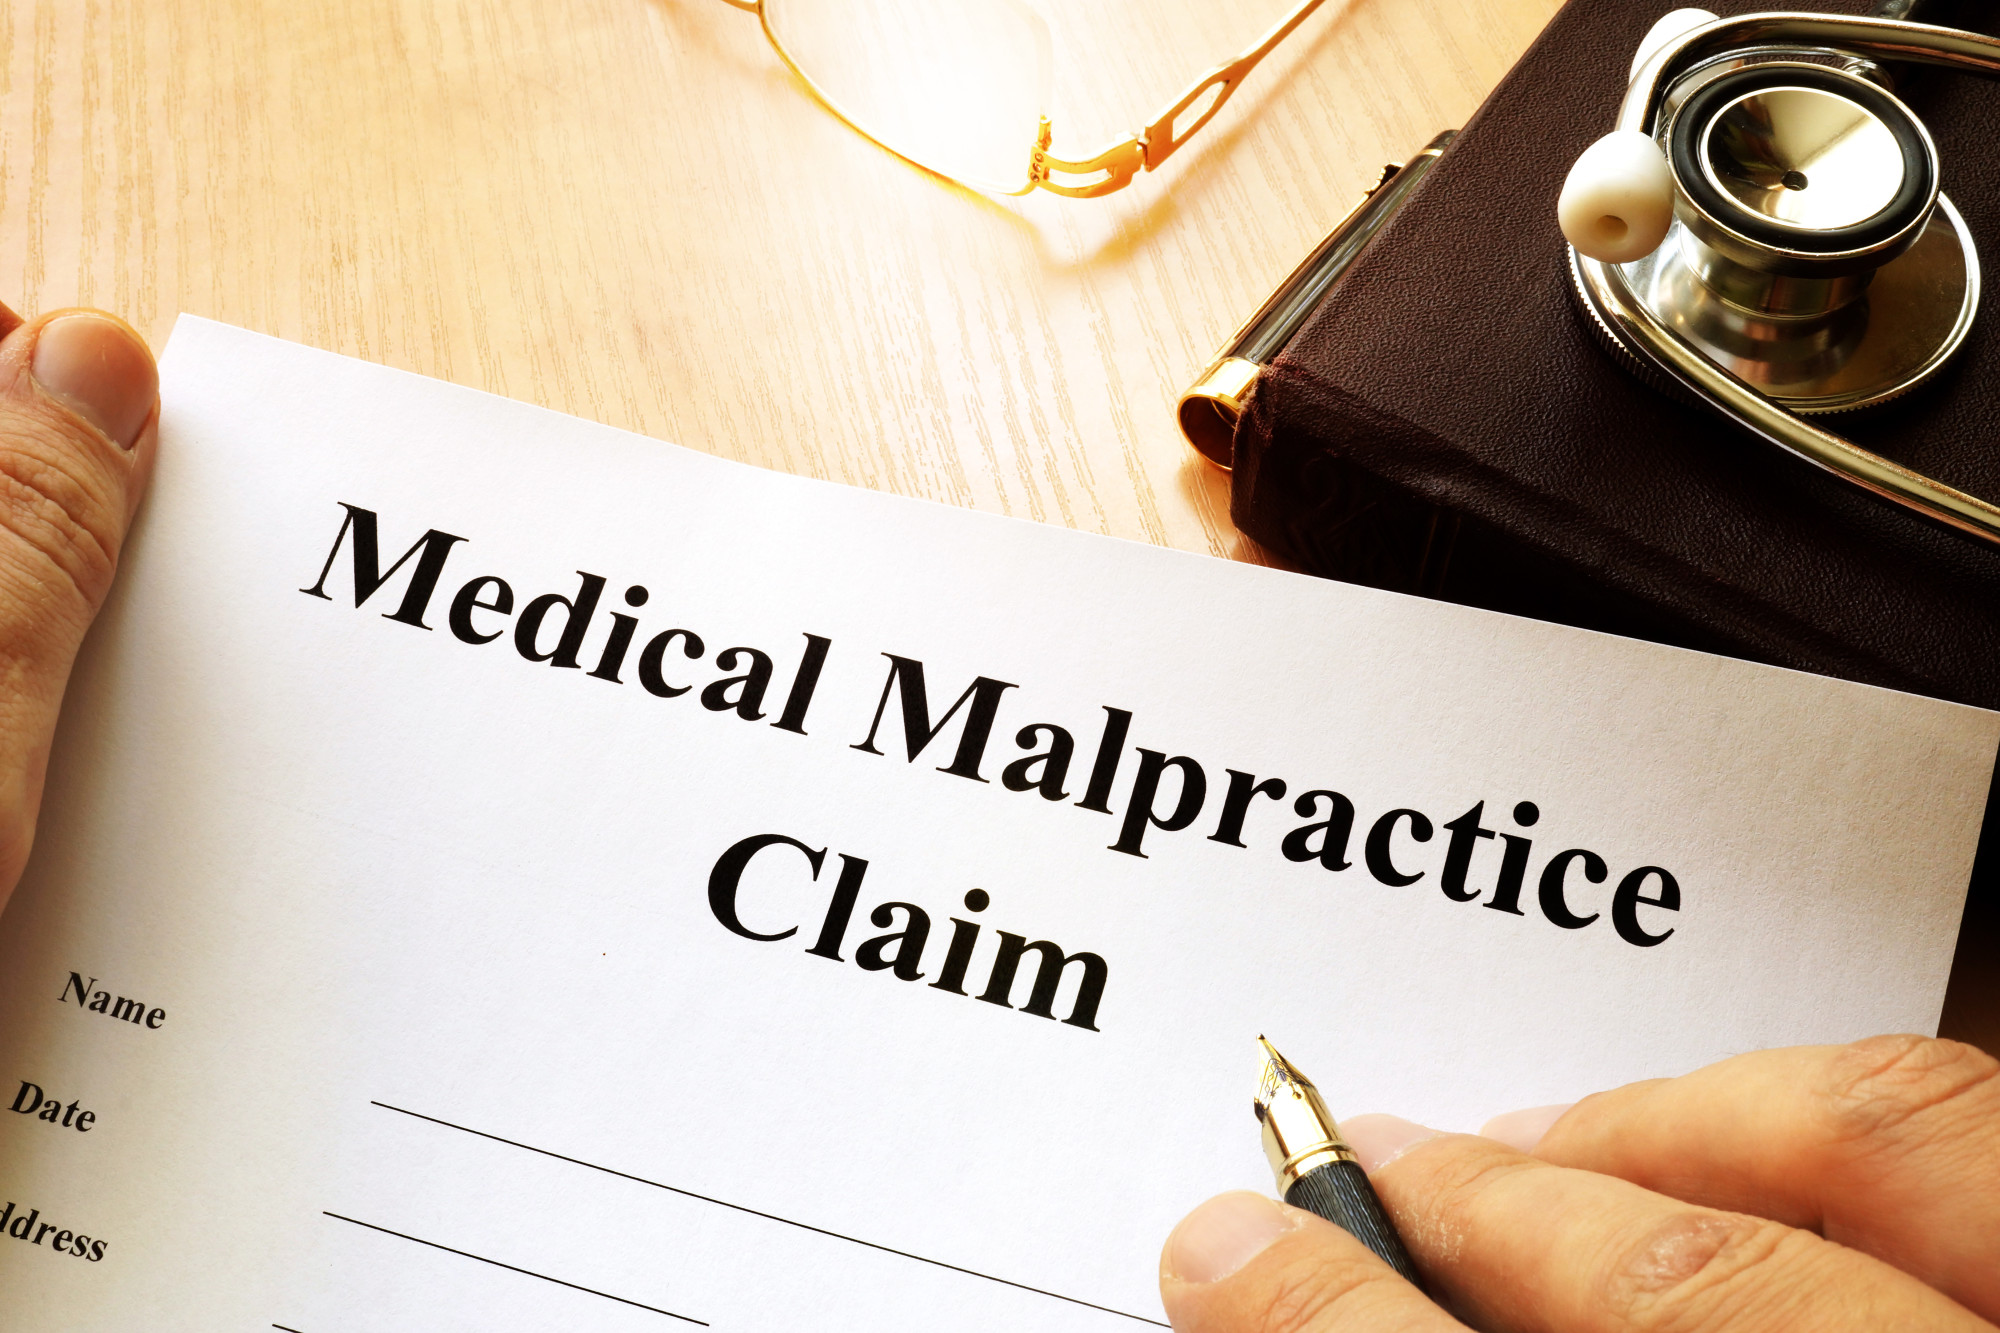 Reasons You May Want To File a Medical Malpractice Claim